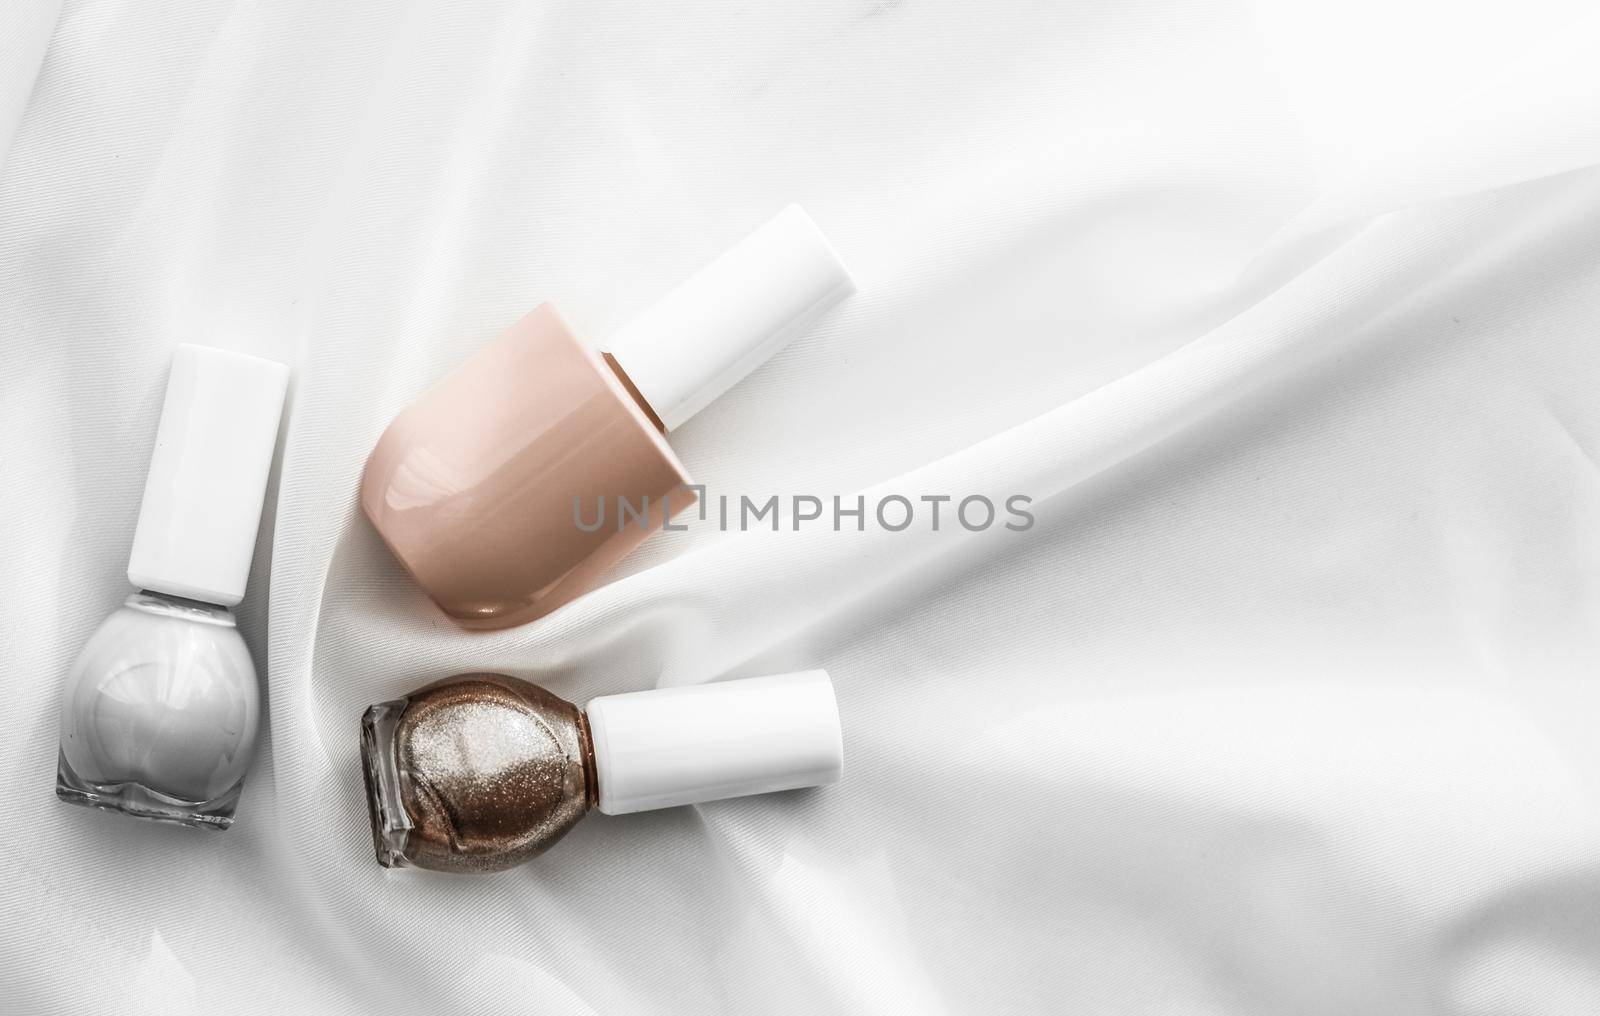 Cosmetic branding, salon and glamour concept - Nail polish bottles on silk background, french manicure products and nailpolish make-up cosmetics for luxury beauty brand and holiday flatlay art design